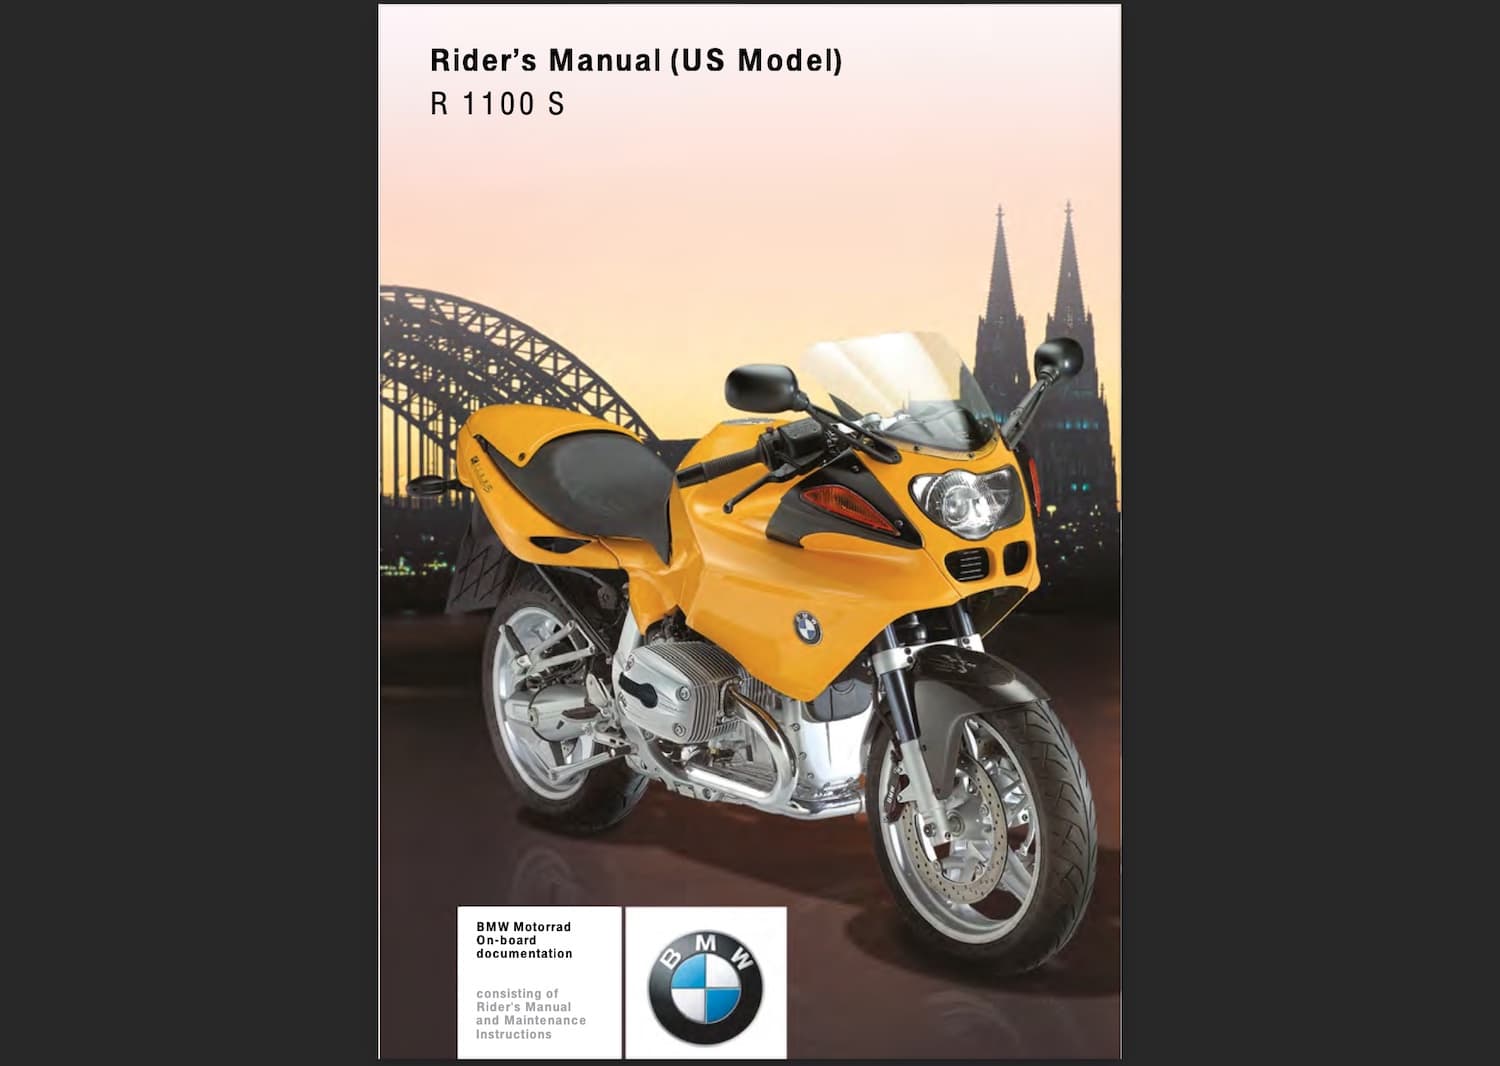 2007 BMW R 1100 S Rider's Manual booklet cover